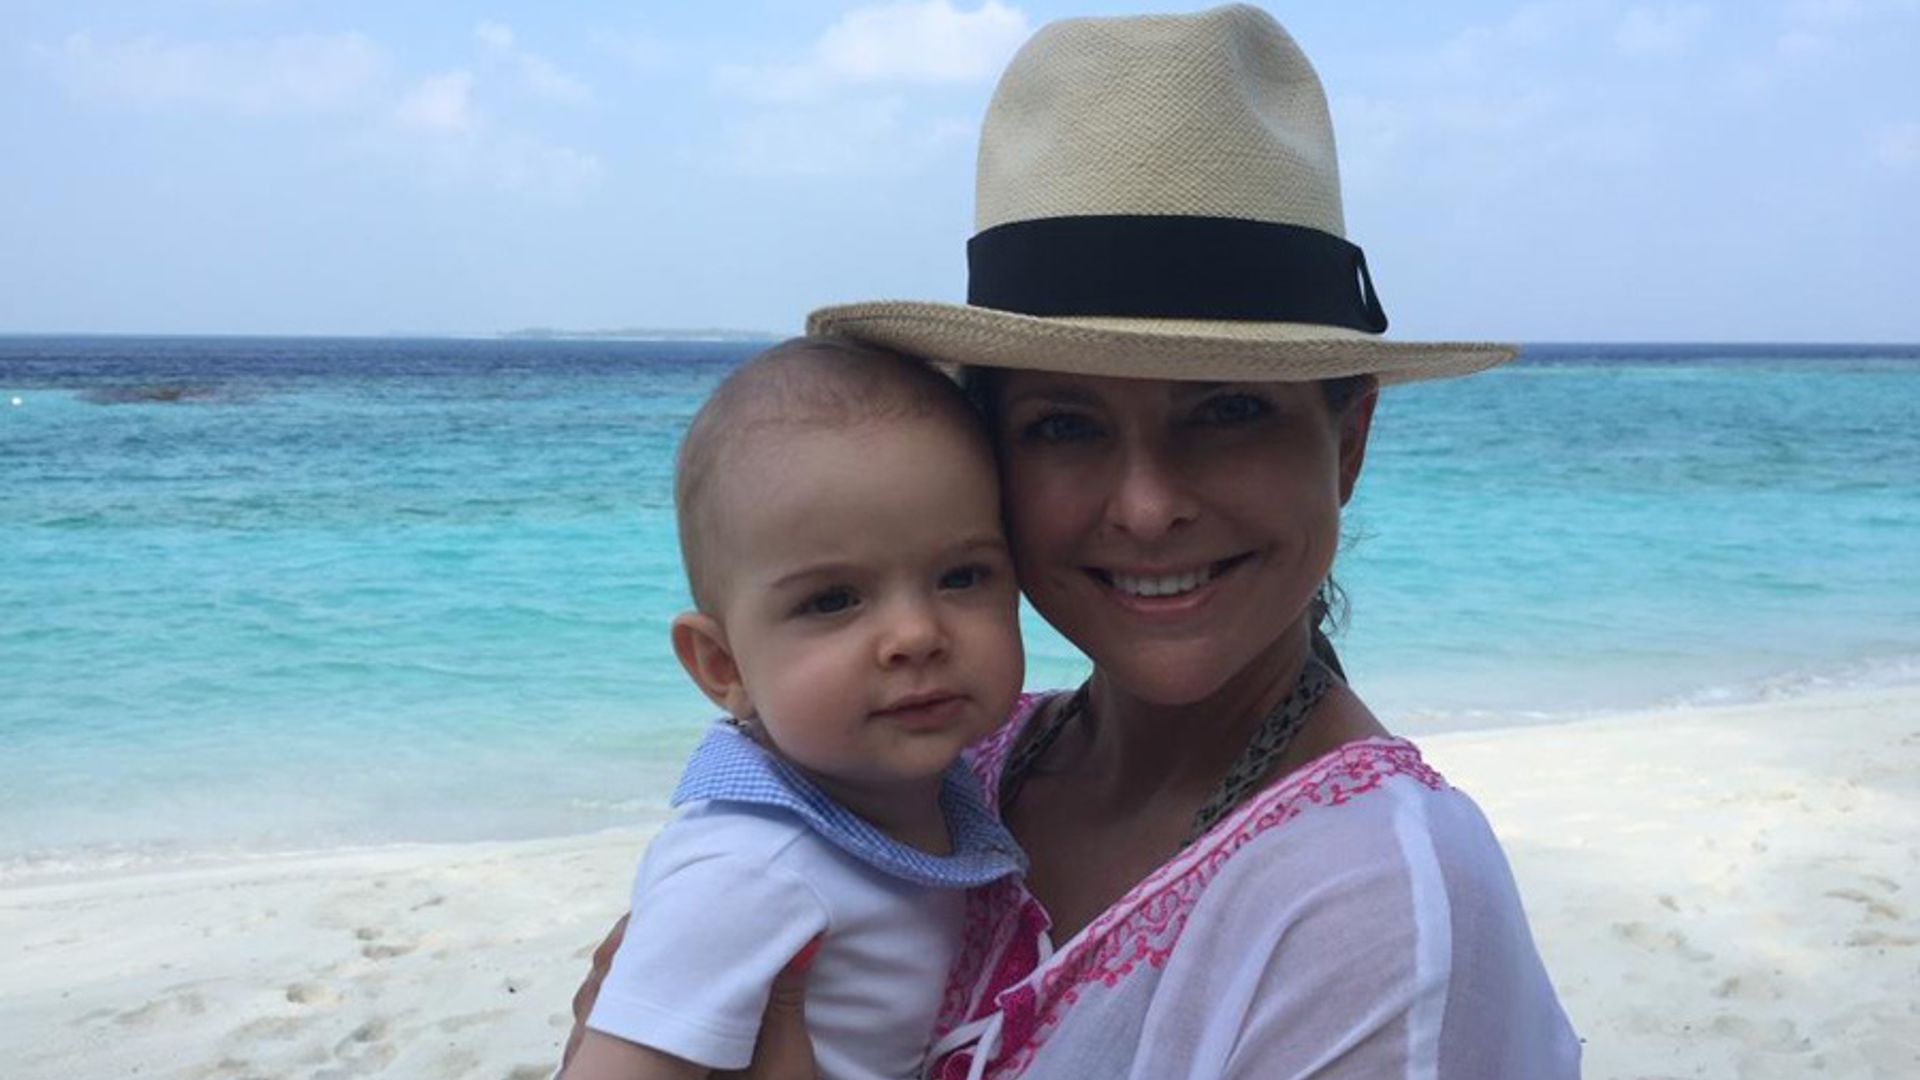 Sweden's Princess Madeleine soaks up family time in the Maldives